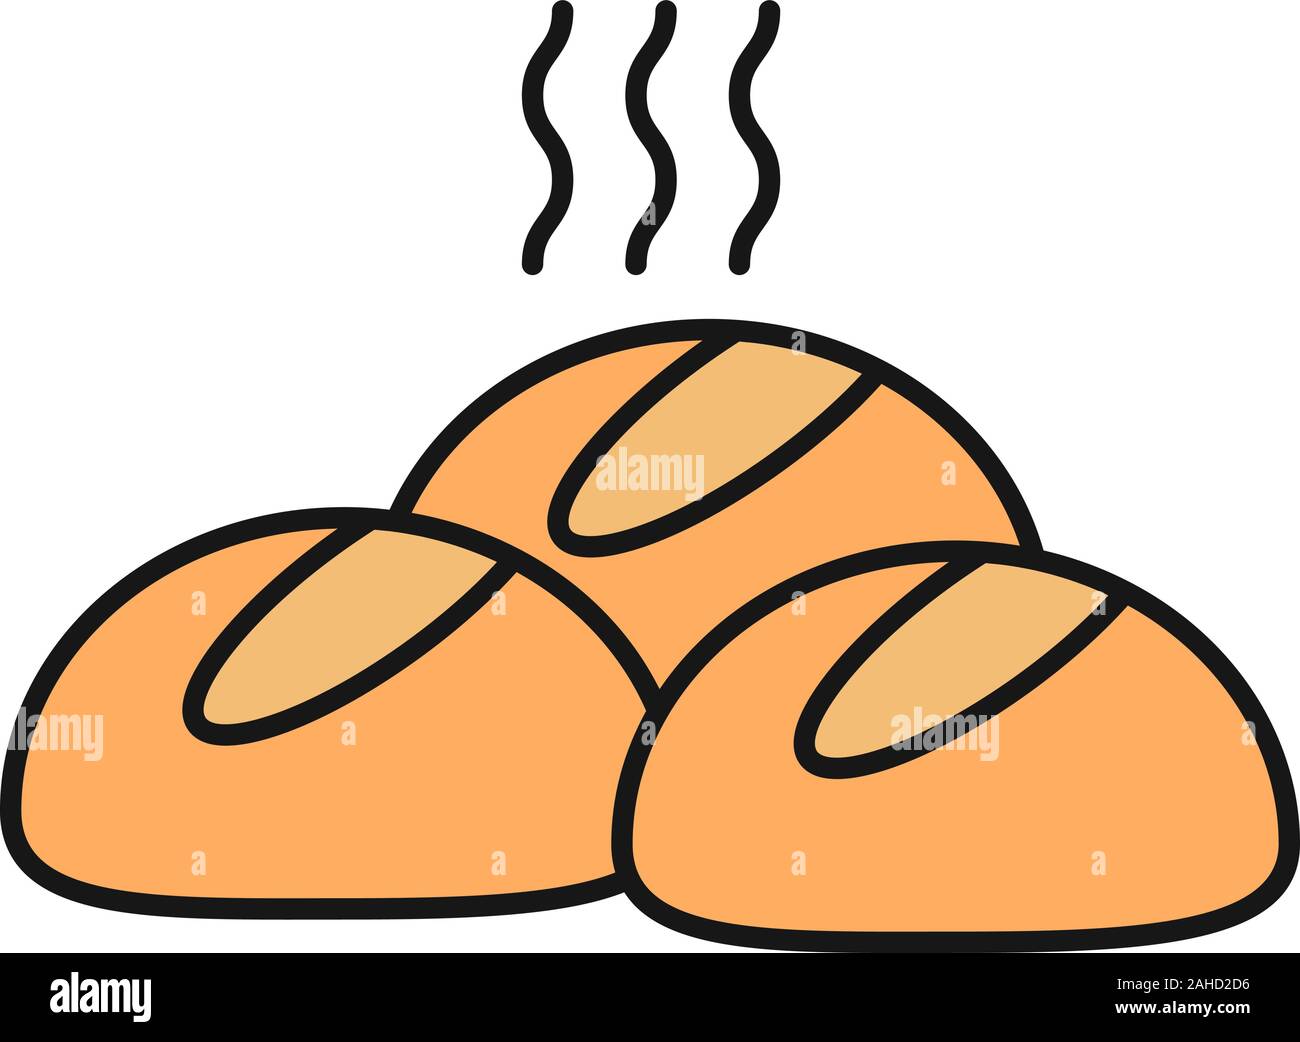 Dinner rolls color icon. Round buns. Isolated vector illustration Stock ...